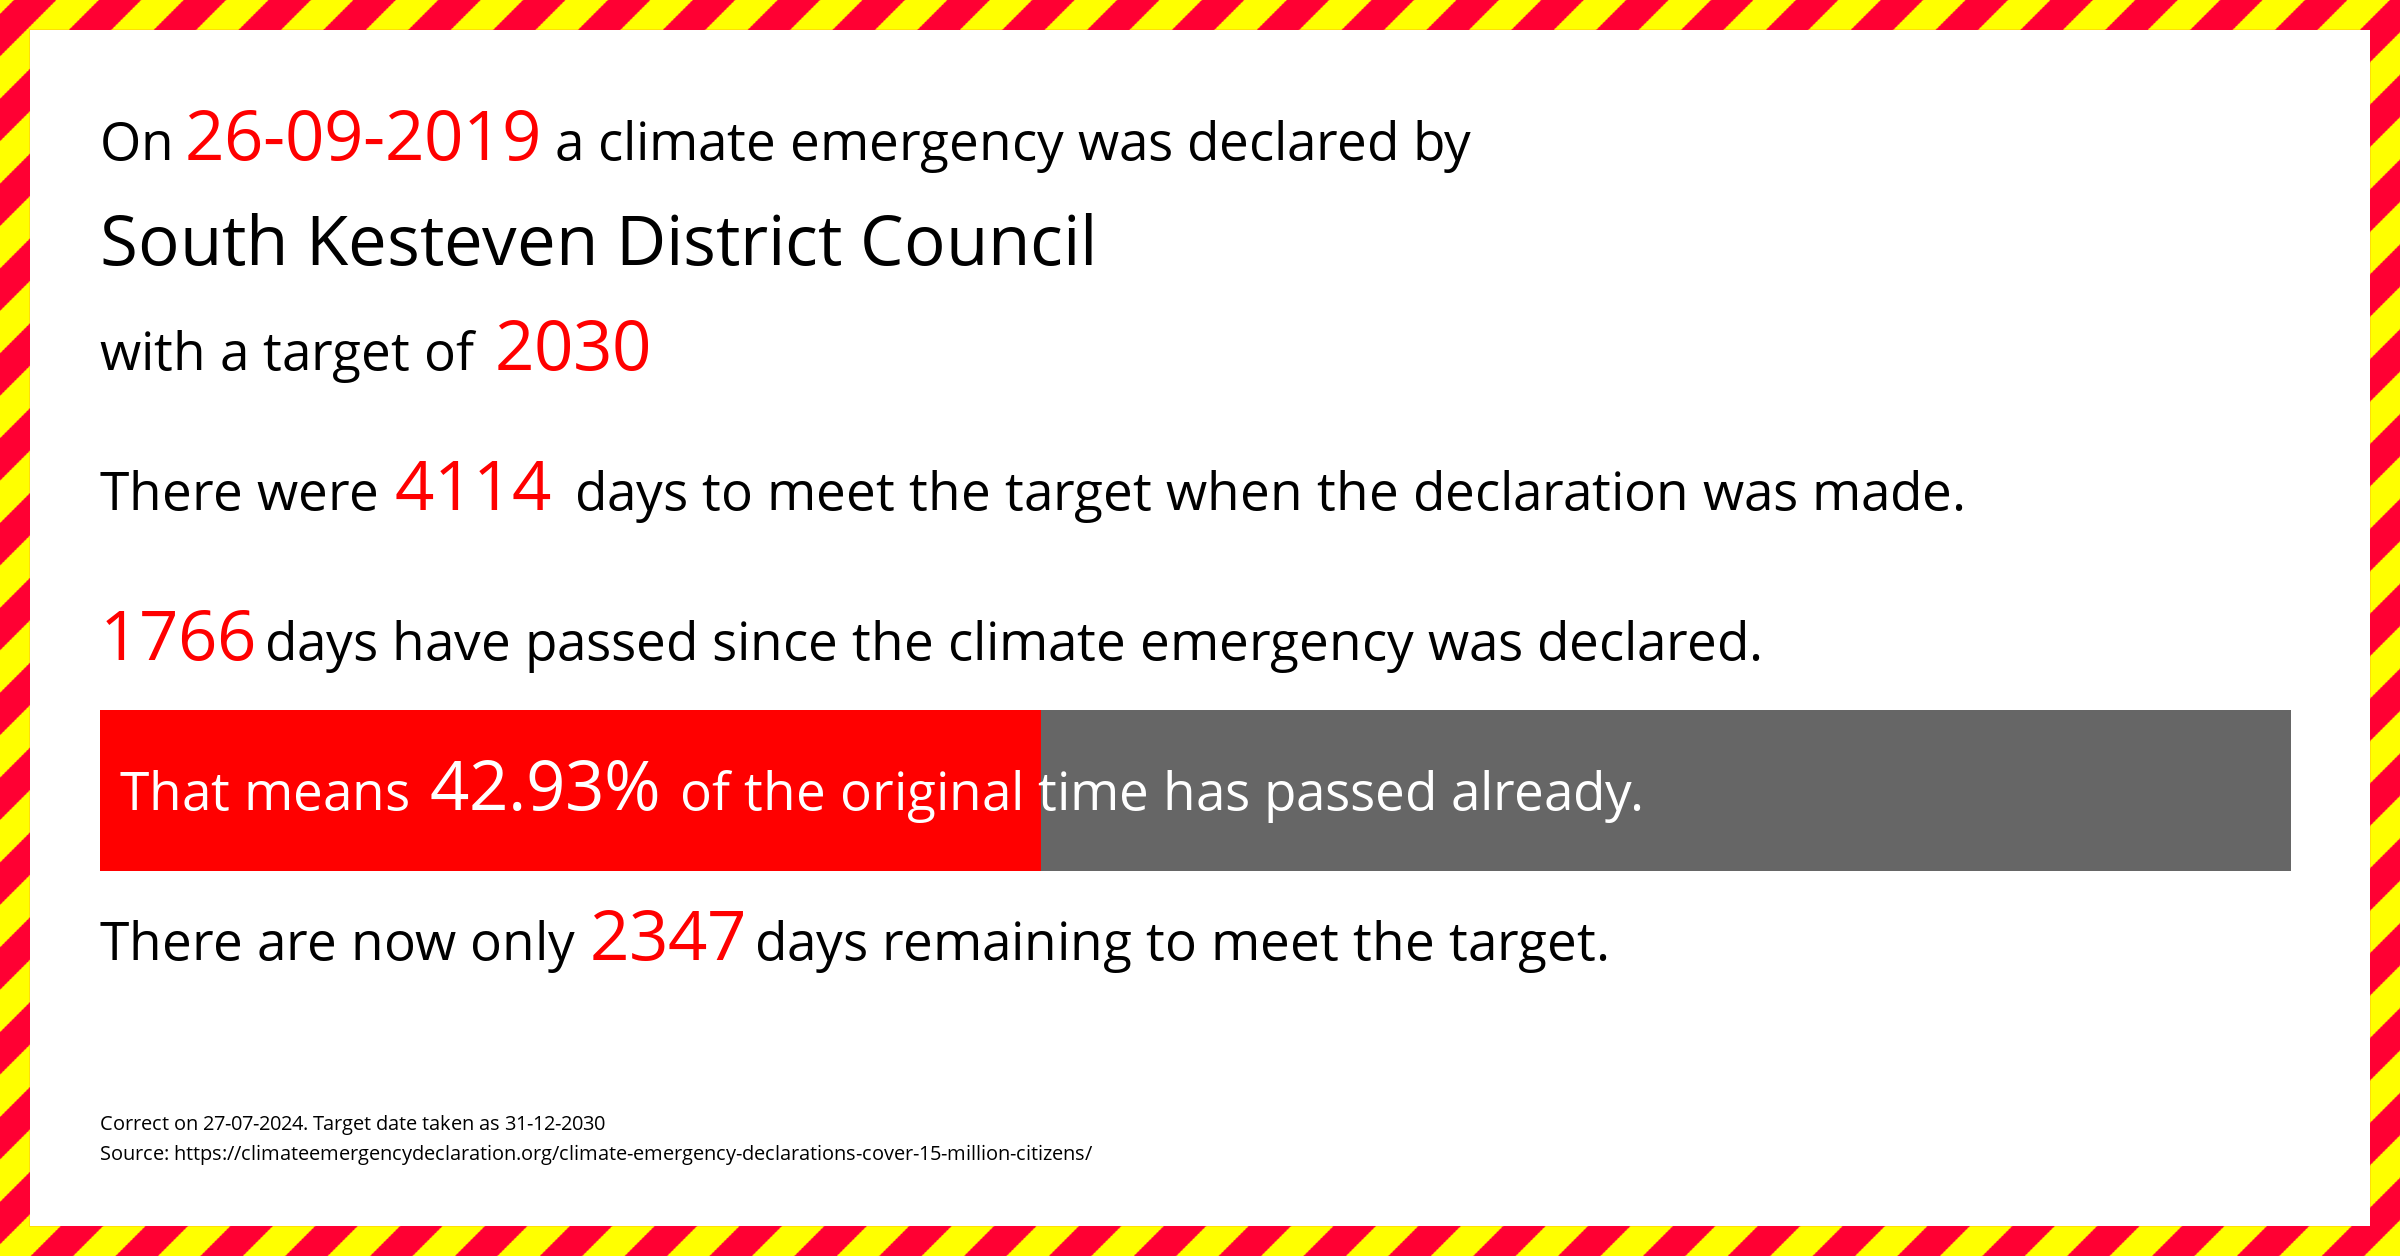 South Kesteven District Council  declared a Climate emergency on Thursday 26th September 2019, with a target of 2030.